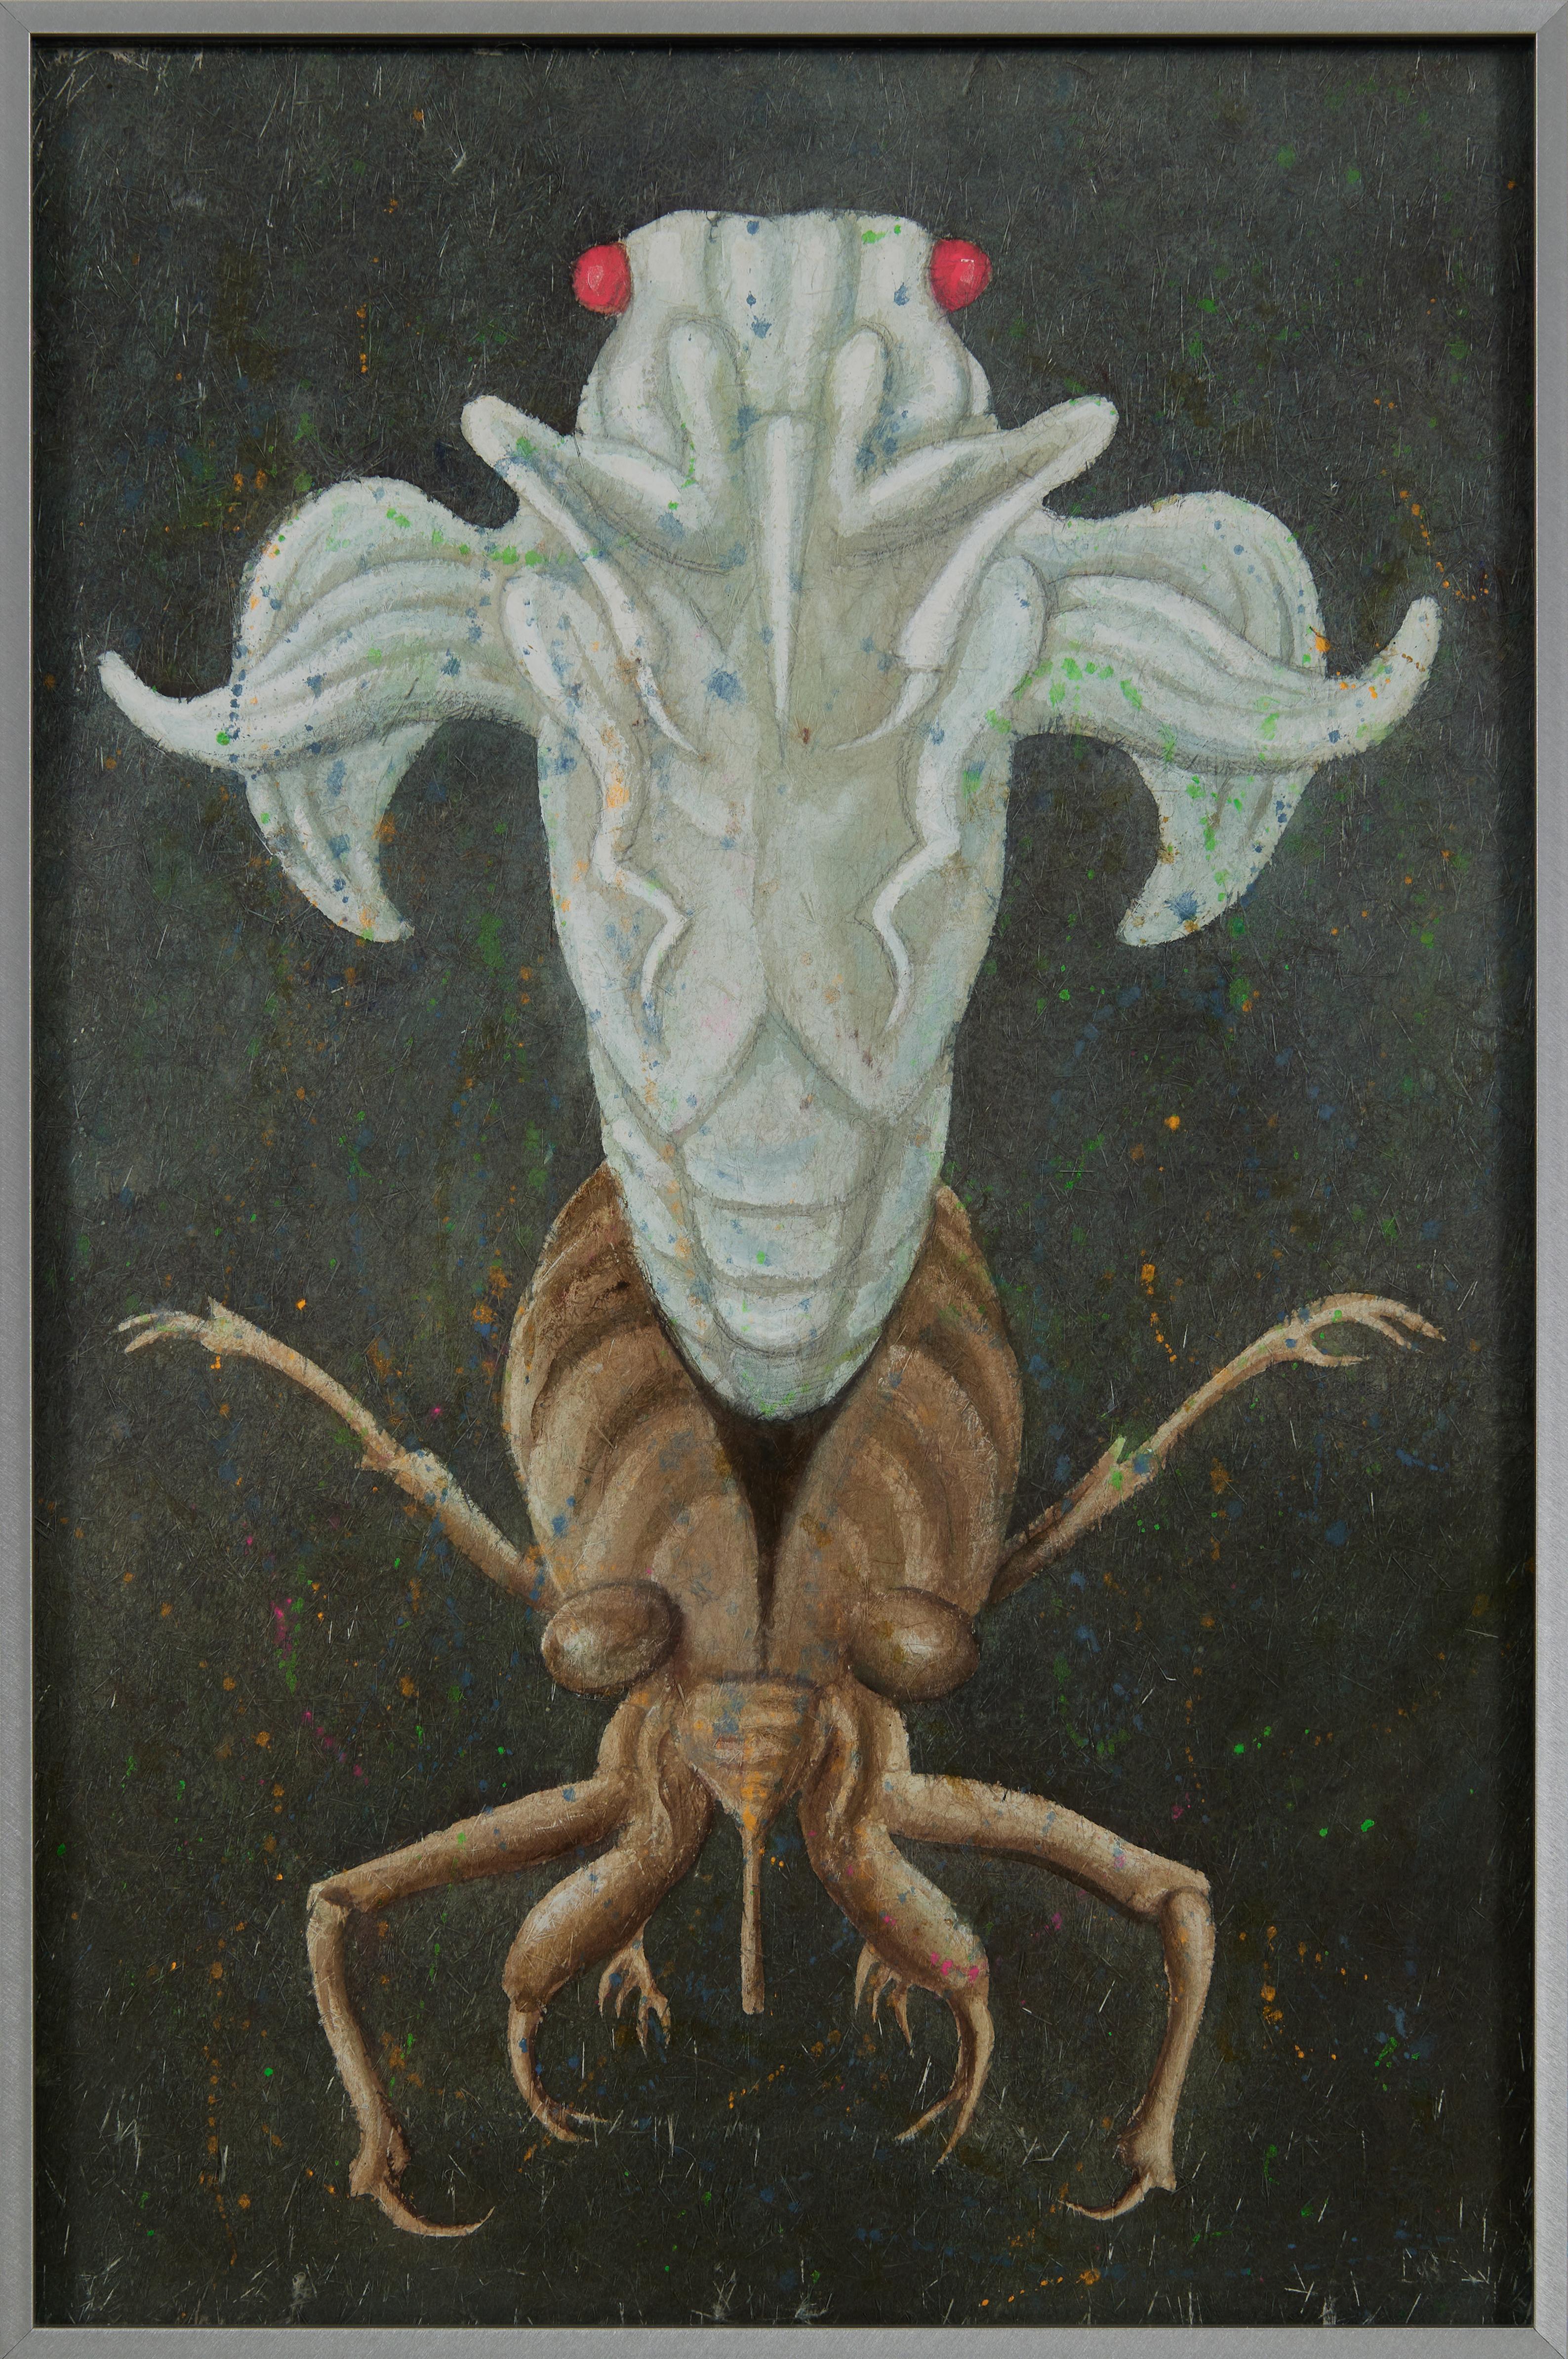 Cicada, Mid-century Figural Surrealist Cleveland School Painting, 1960s - Black Figurative Painting by Clarence Holbrook Carter